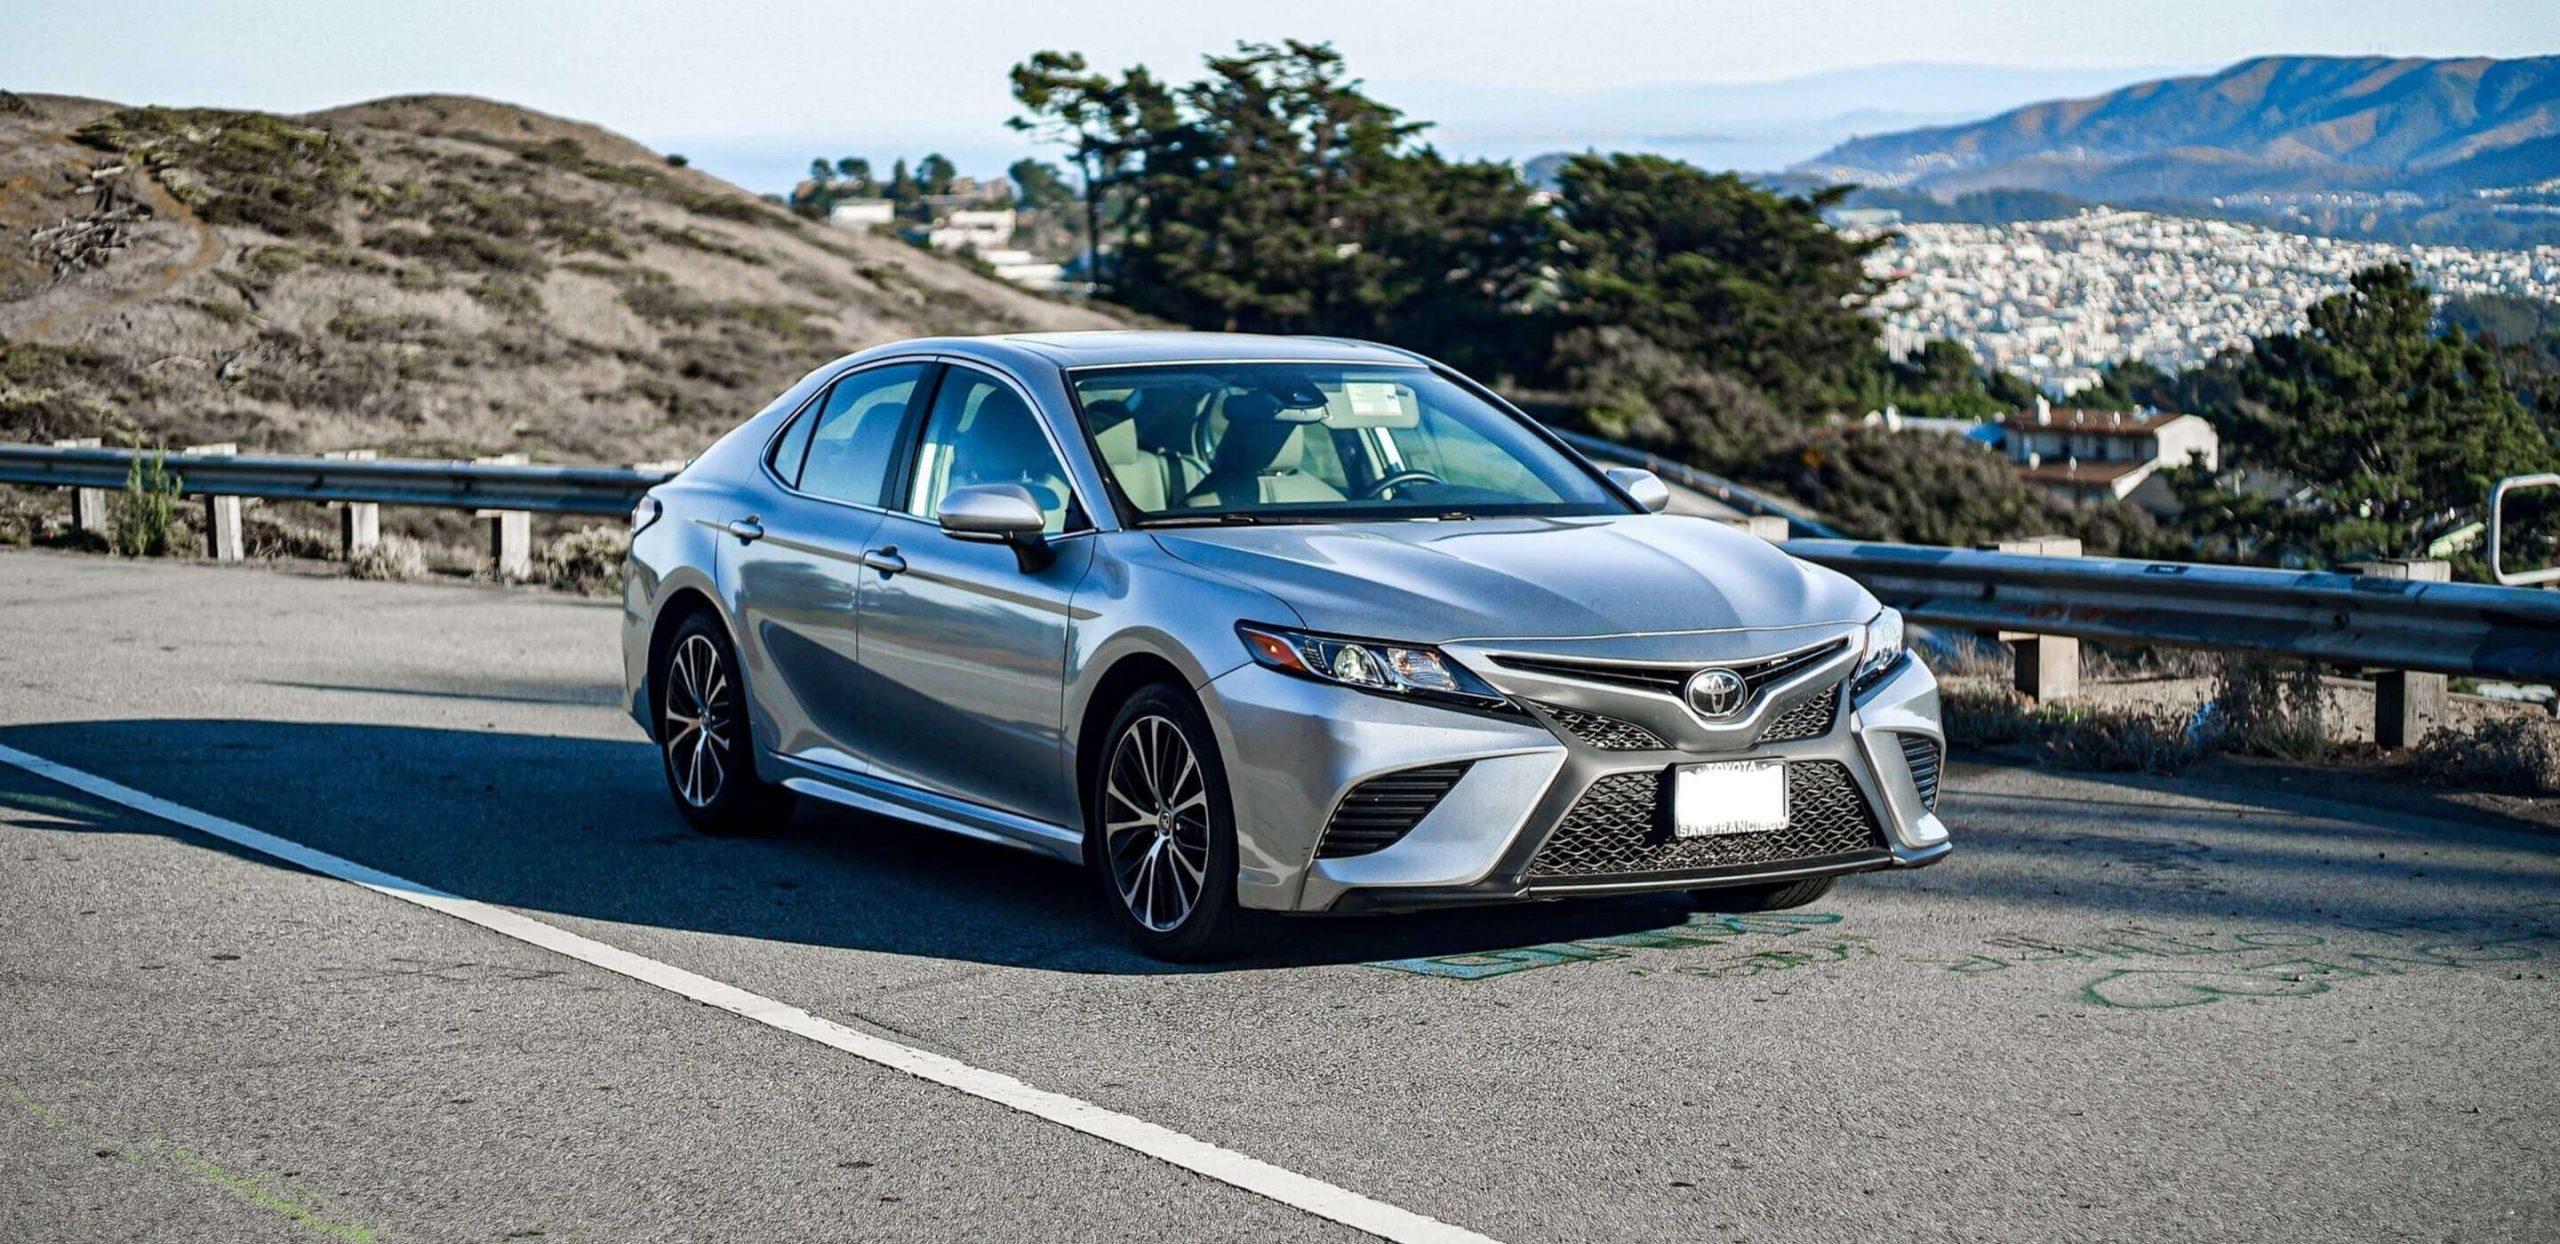 2019-silver-toyota-camry-featured-image